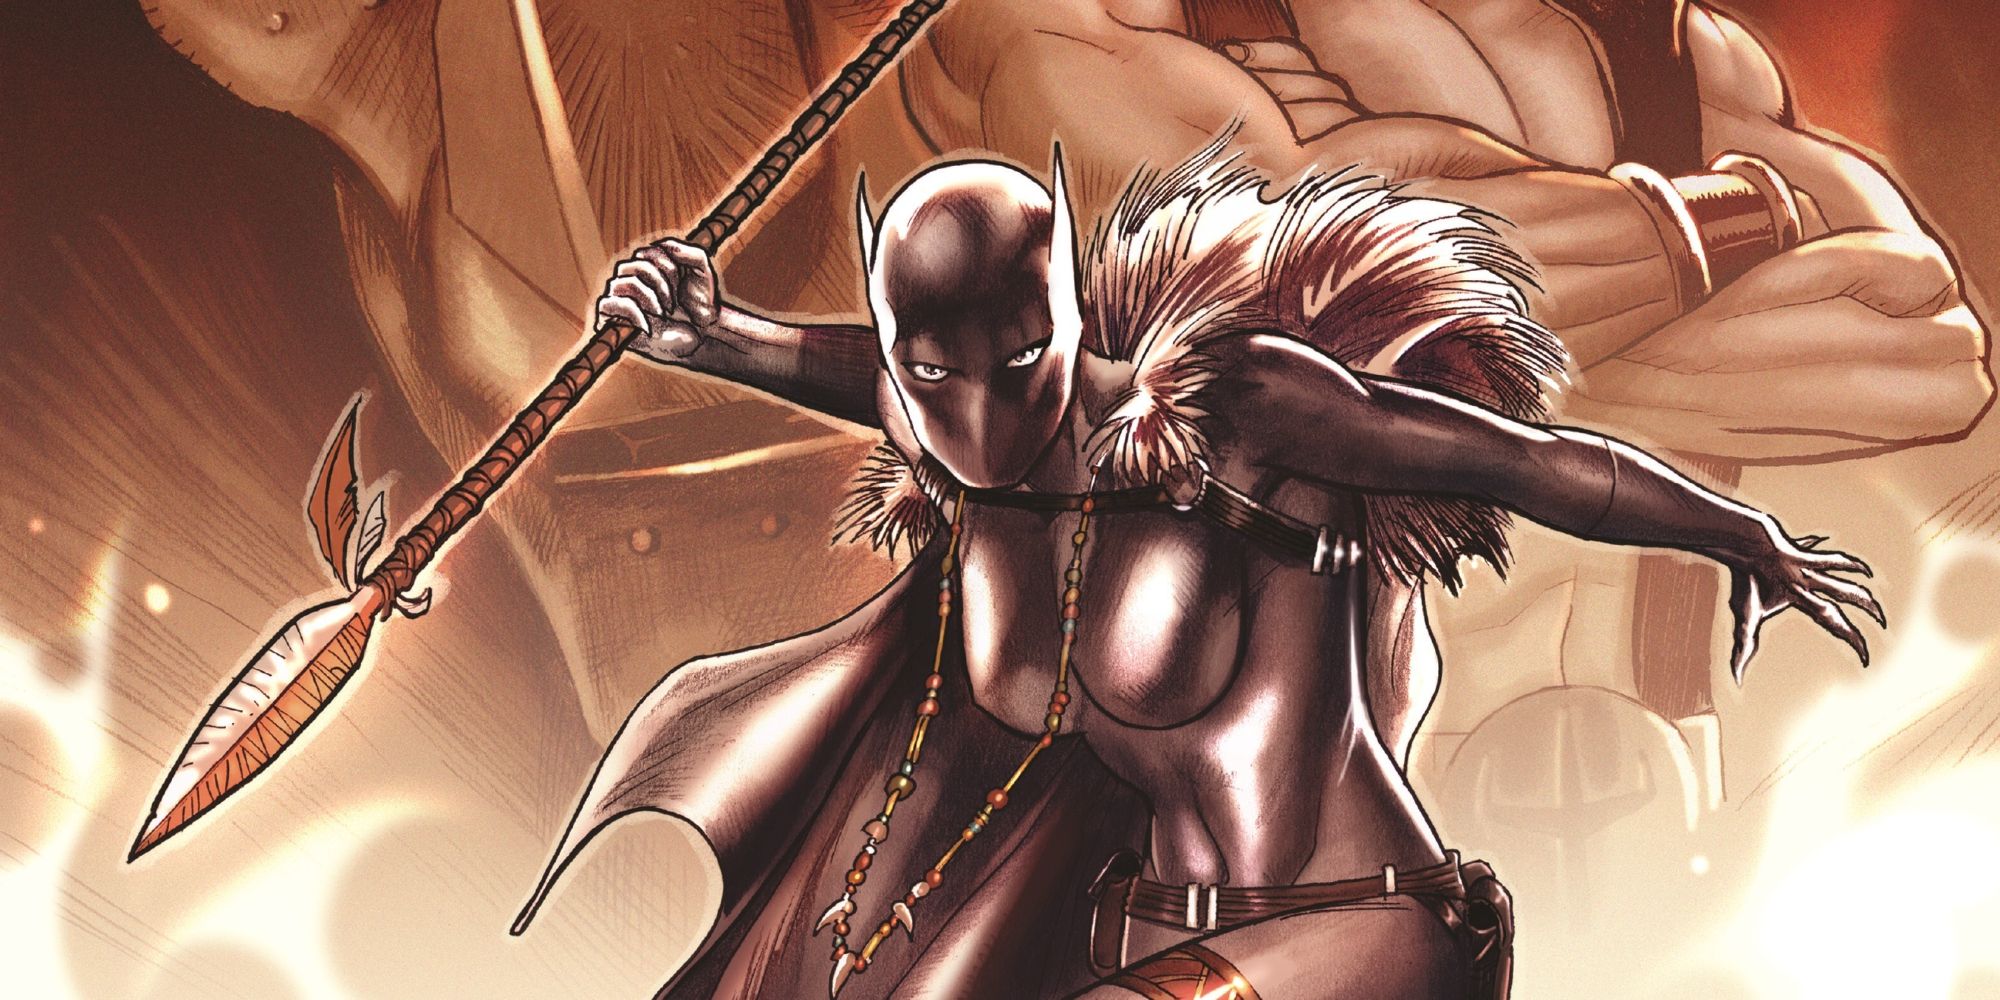 Shuri holds a spear in Black Panther comics.